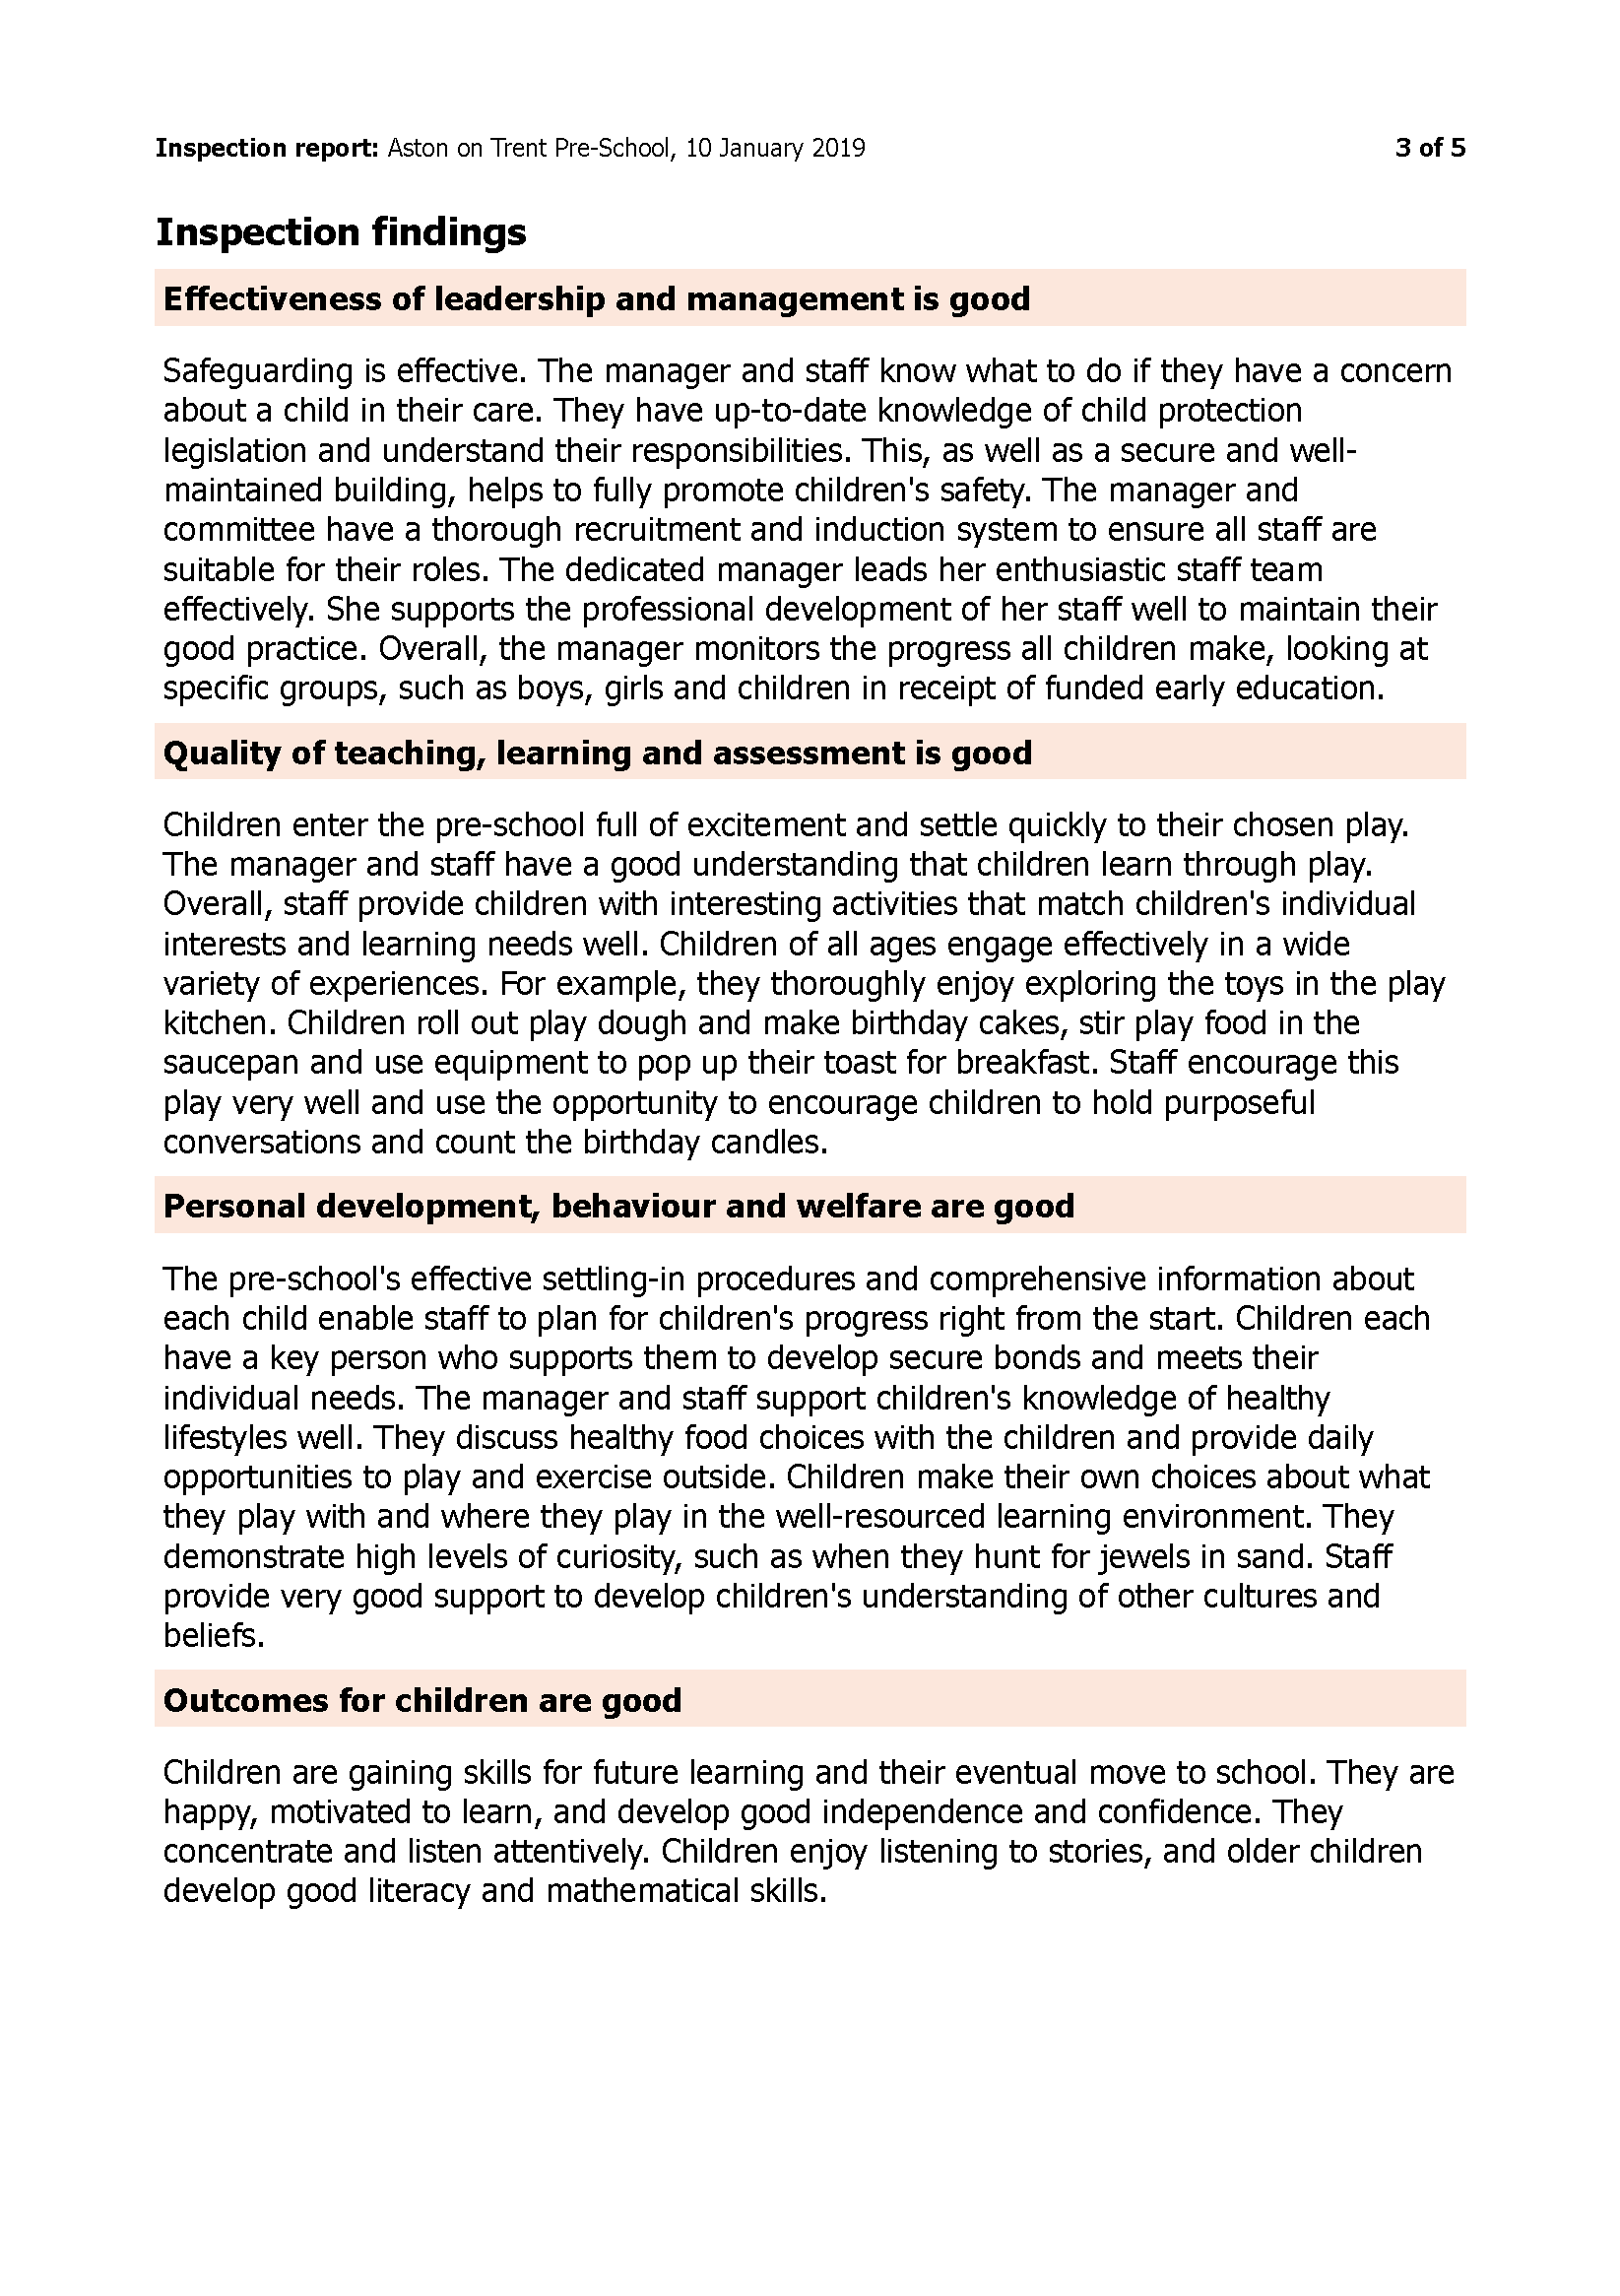 Aot Preschool Ofsted 2019_Page_3.png